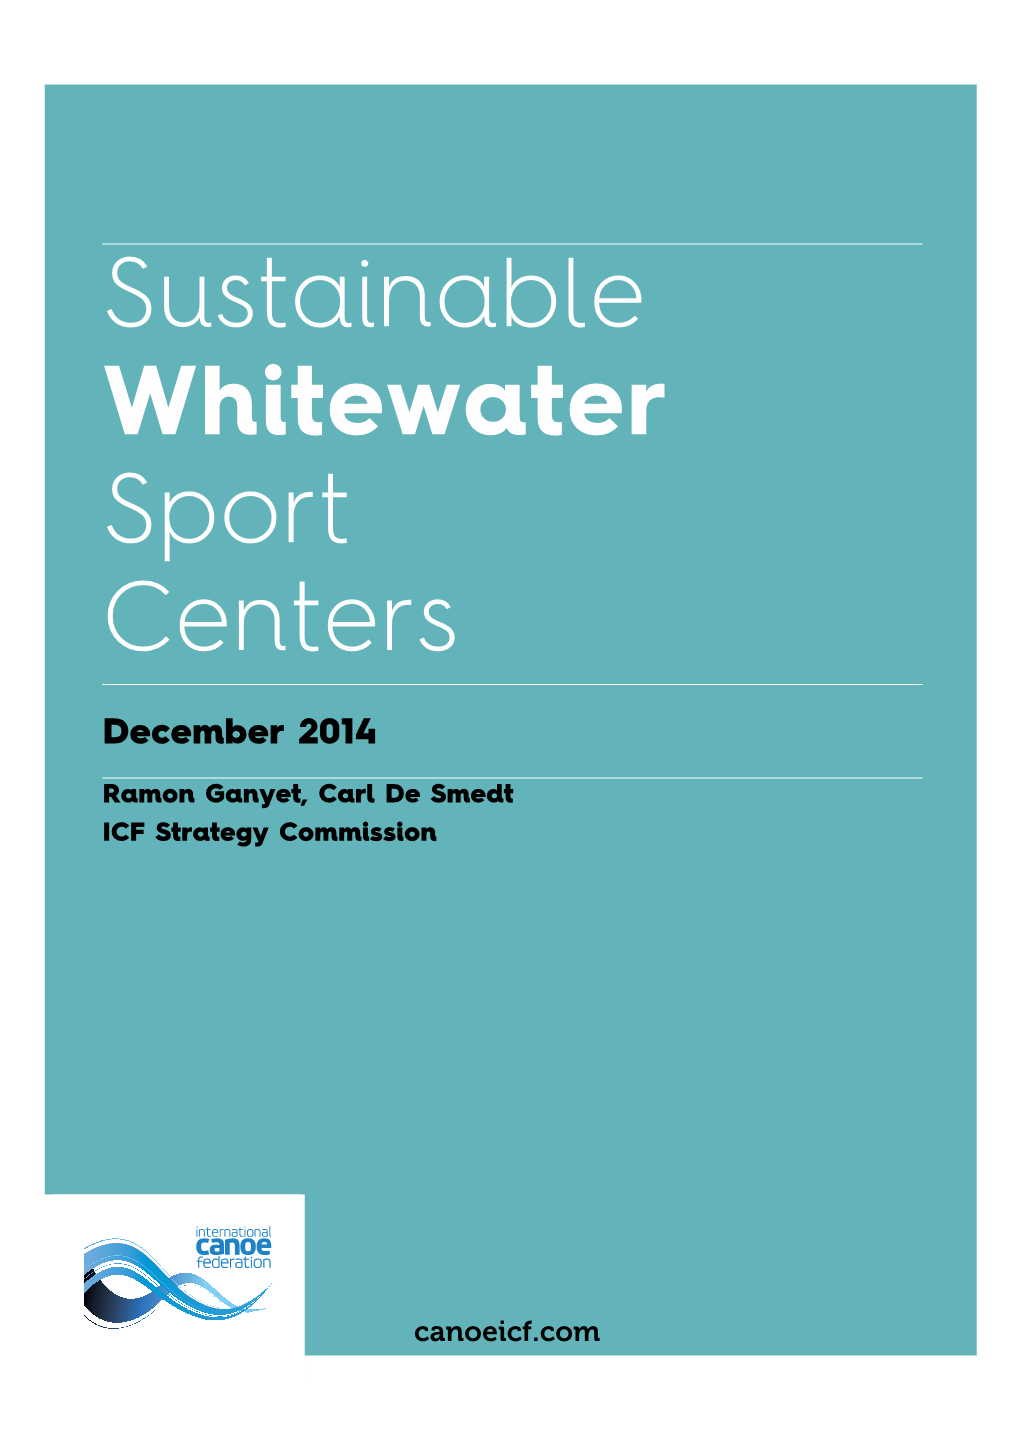 Sustainable Whitewater Sport Centers